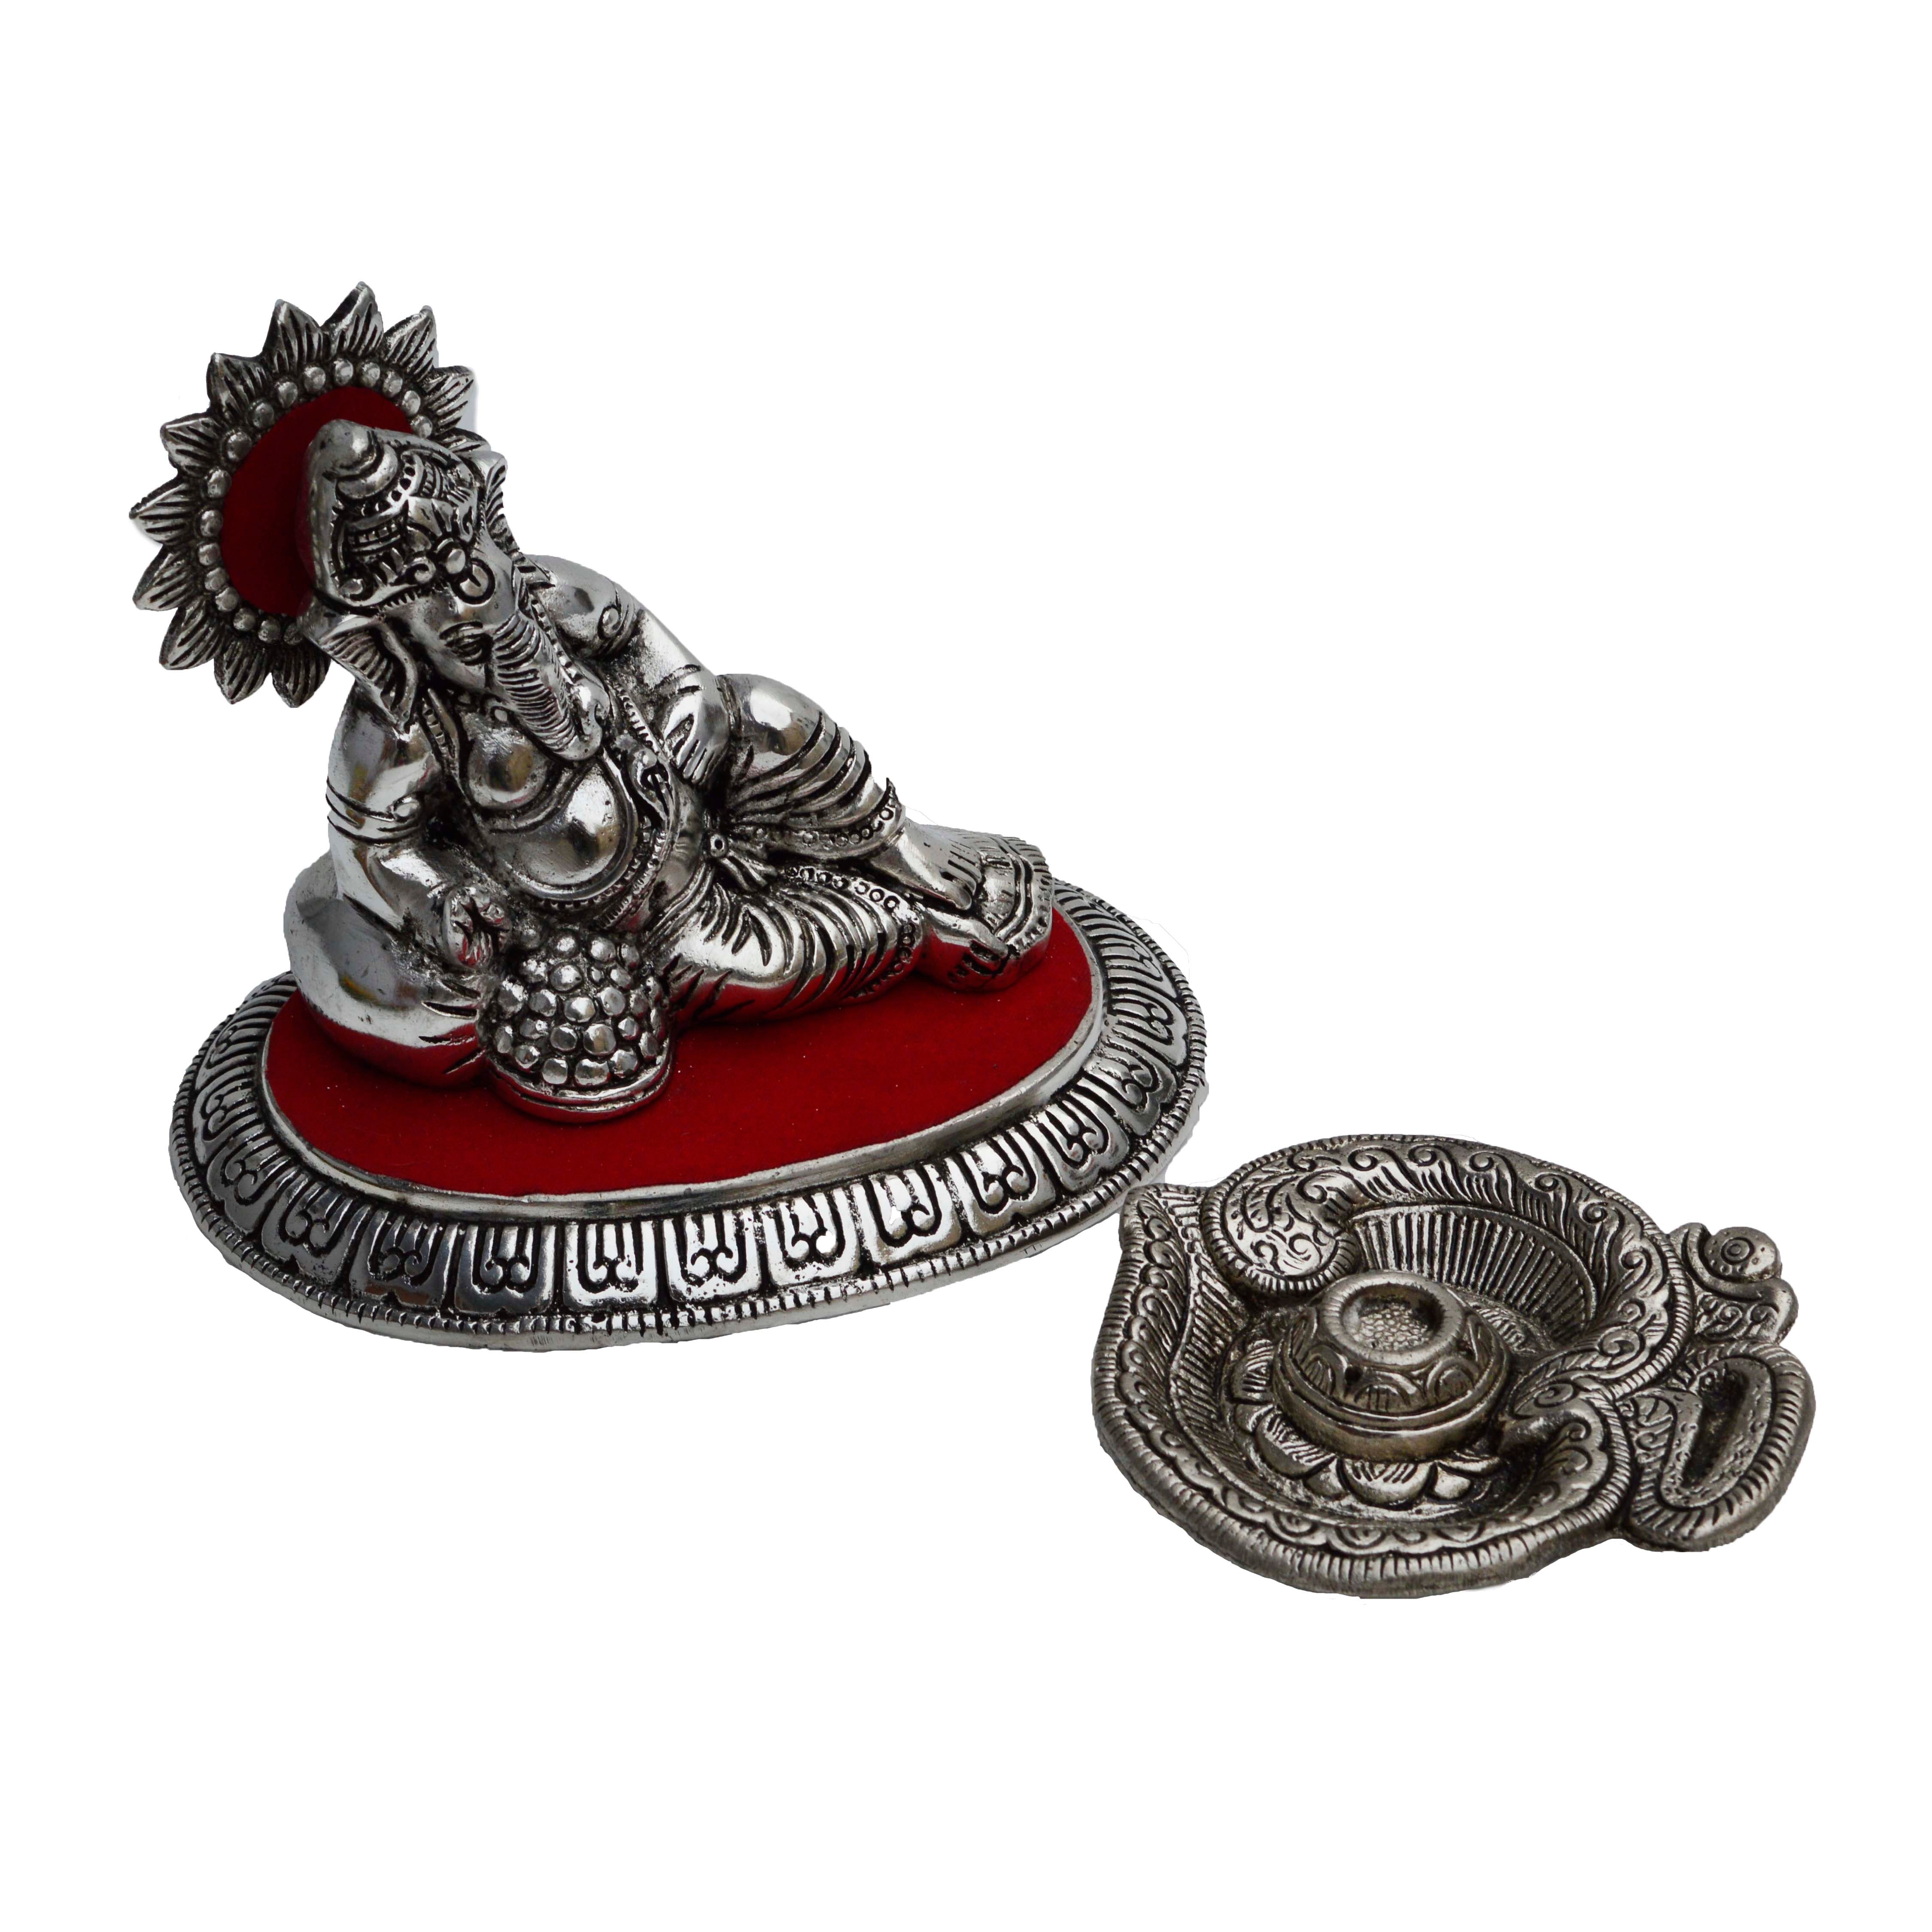 Combo Of Lord Ganesha Idol And Incense Stick Holder(Agarbatti Stand) 1